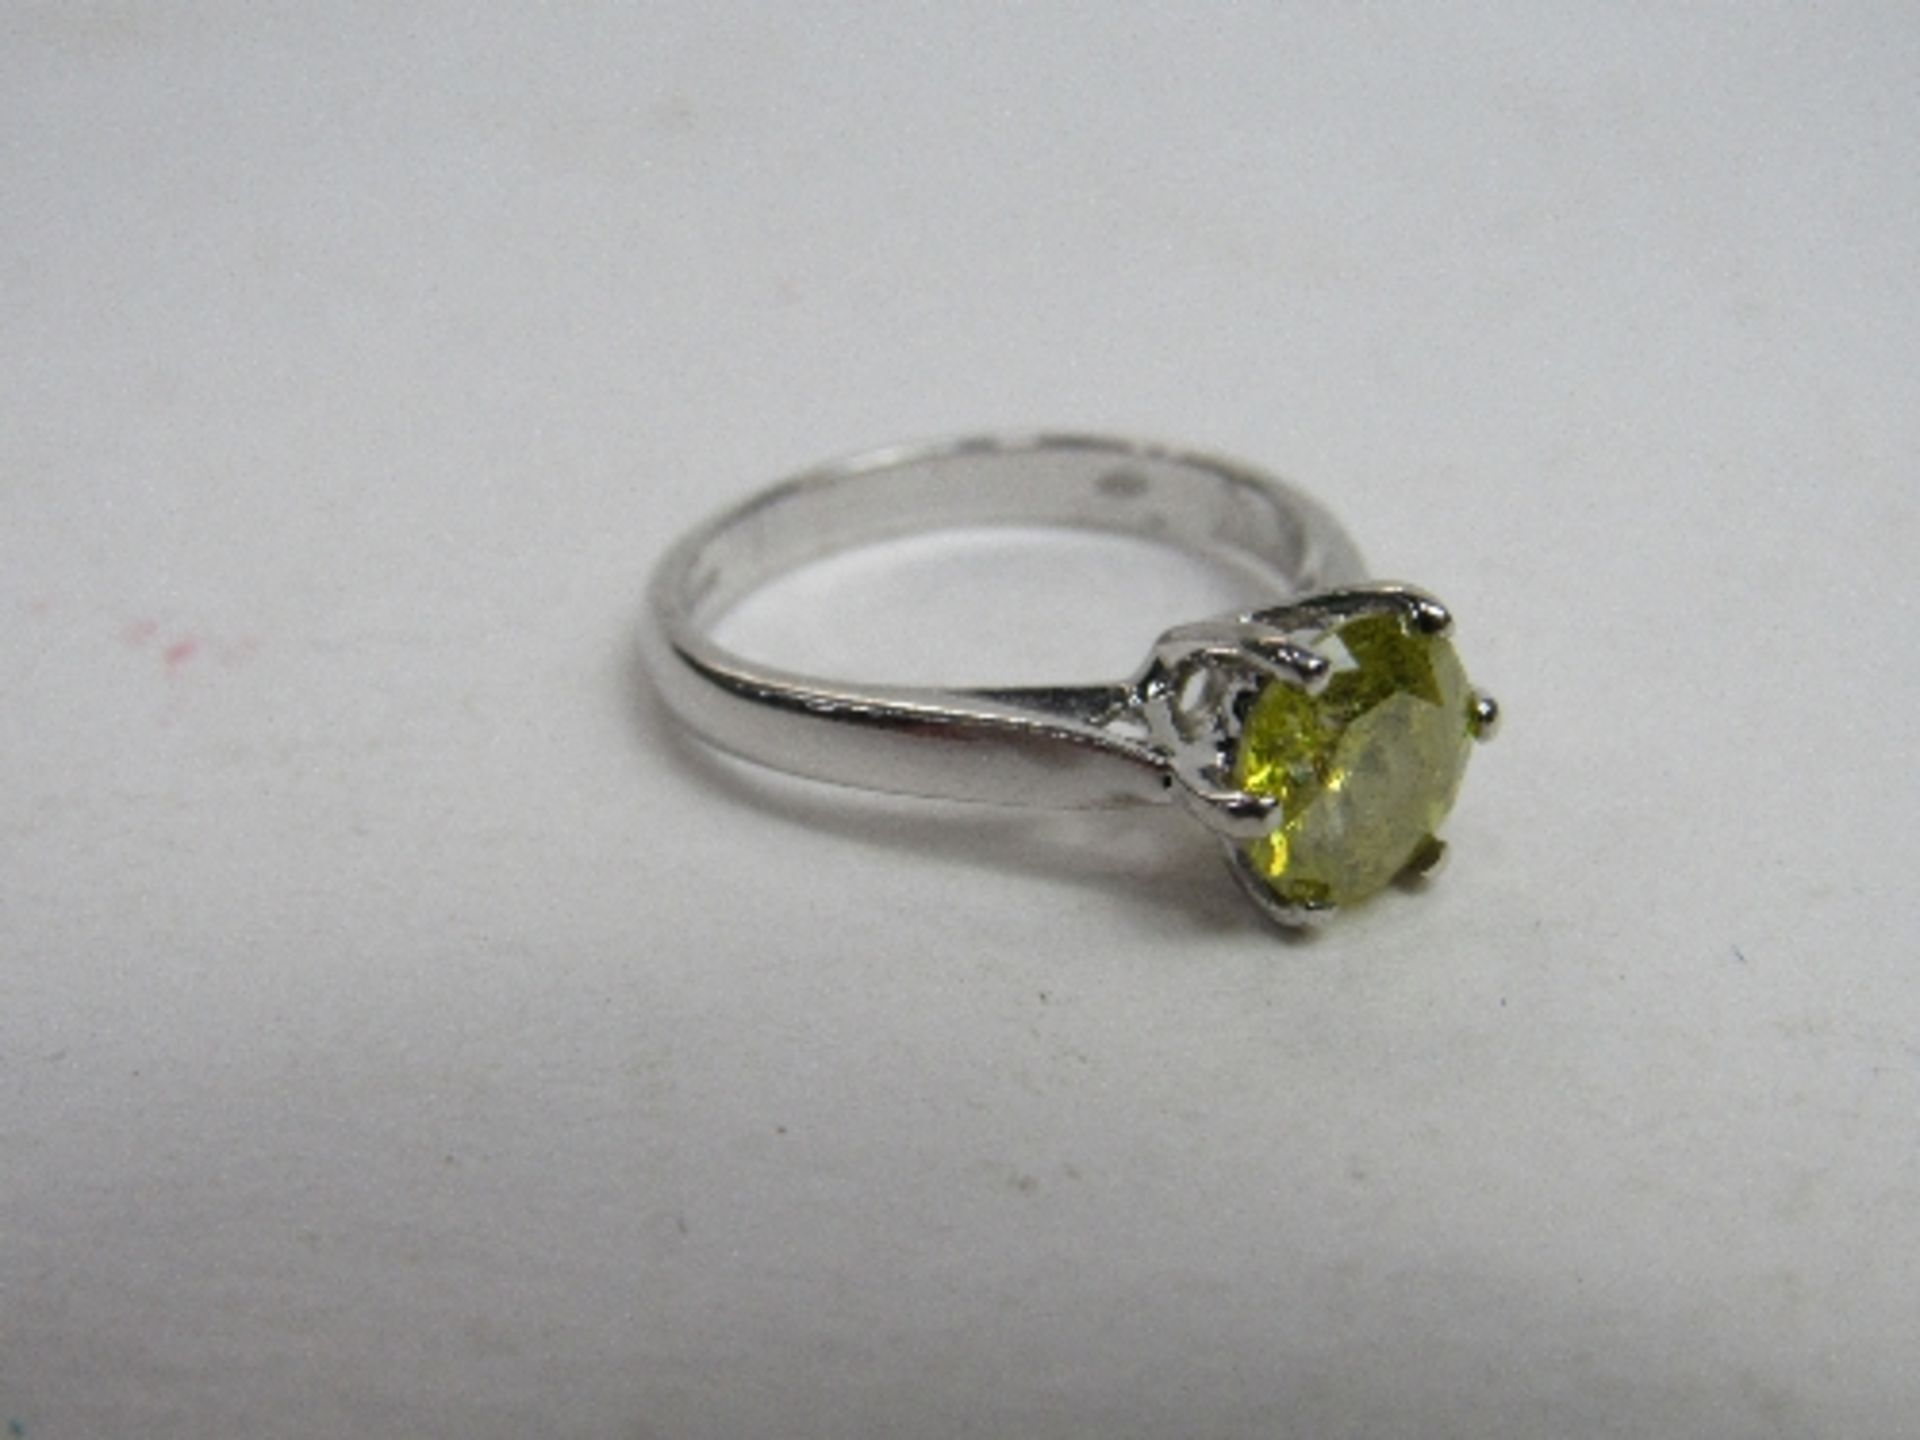 18ct white gold yellow diamond solitaire ring, diamond at least 1.25 carat, size N, wt 4.0gms. Price - Image 2 of 2